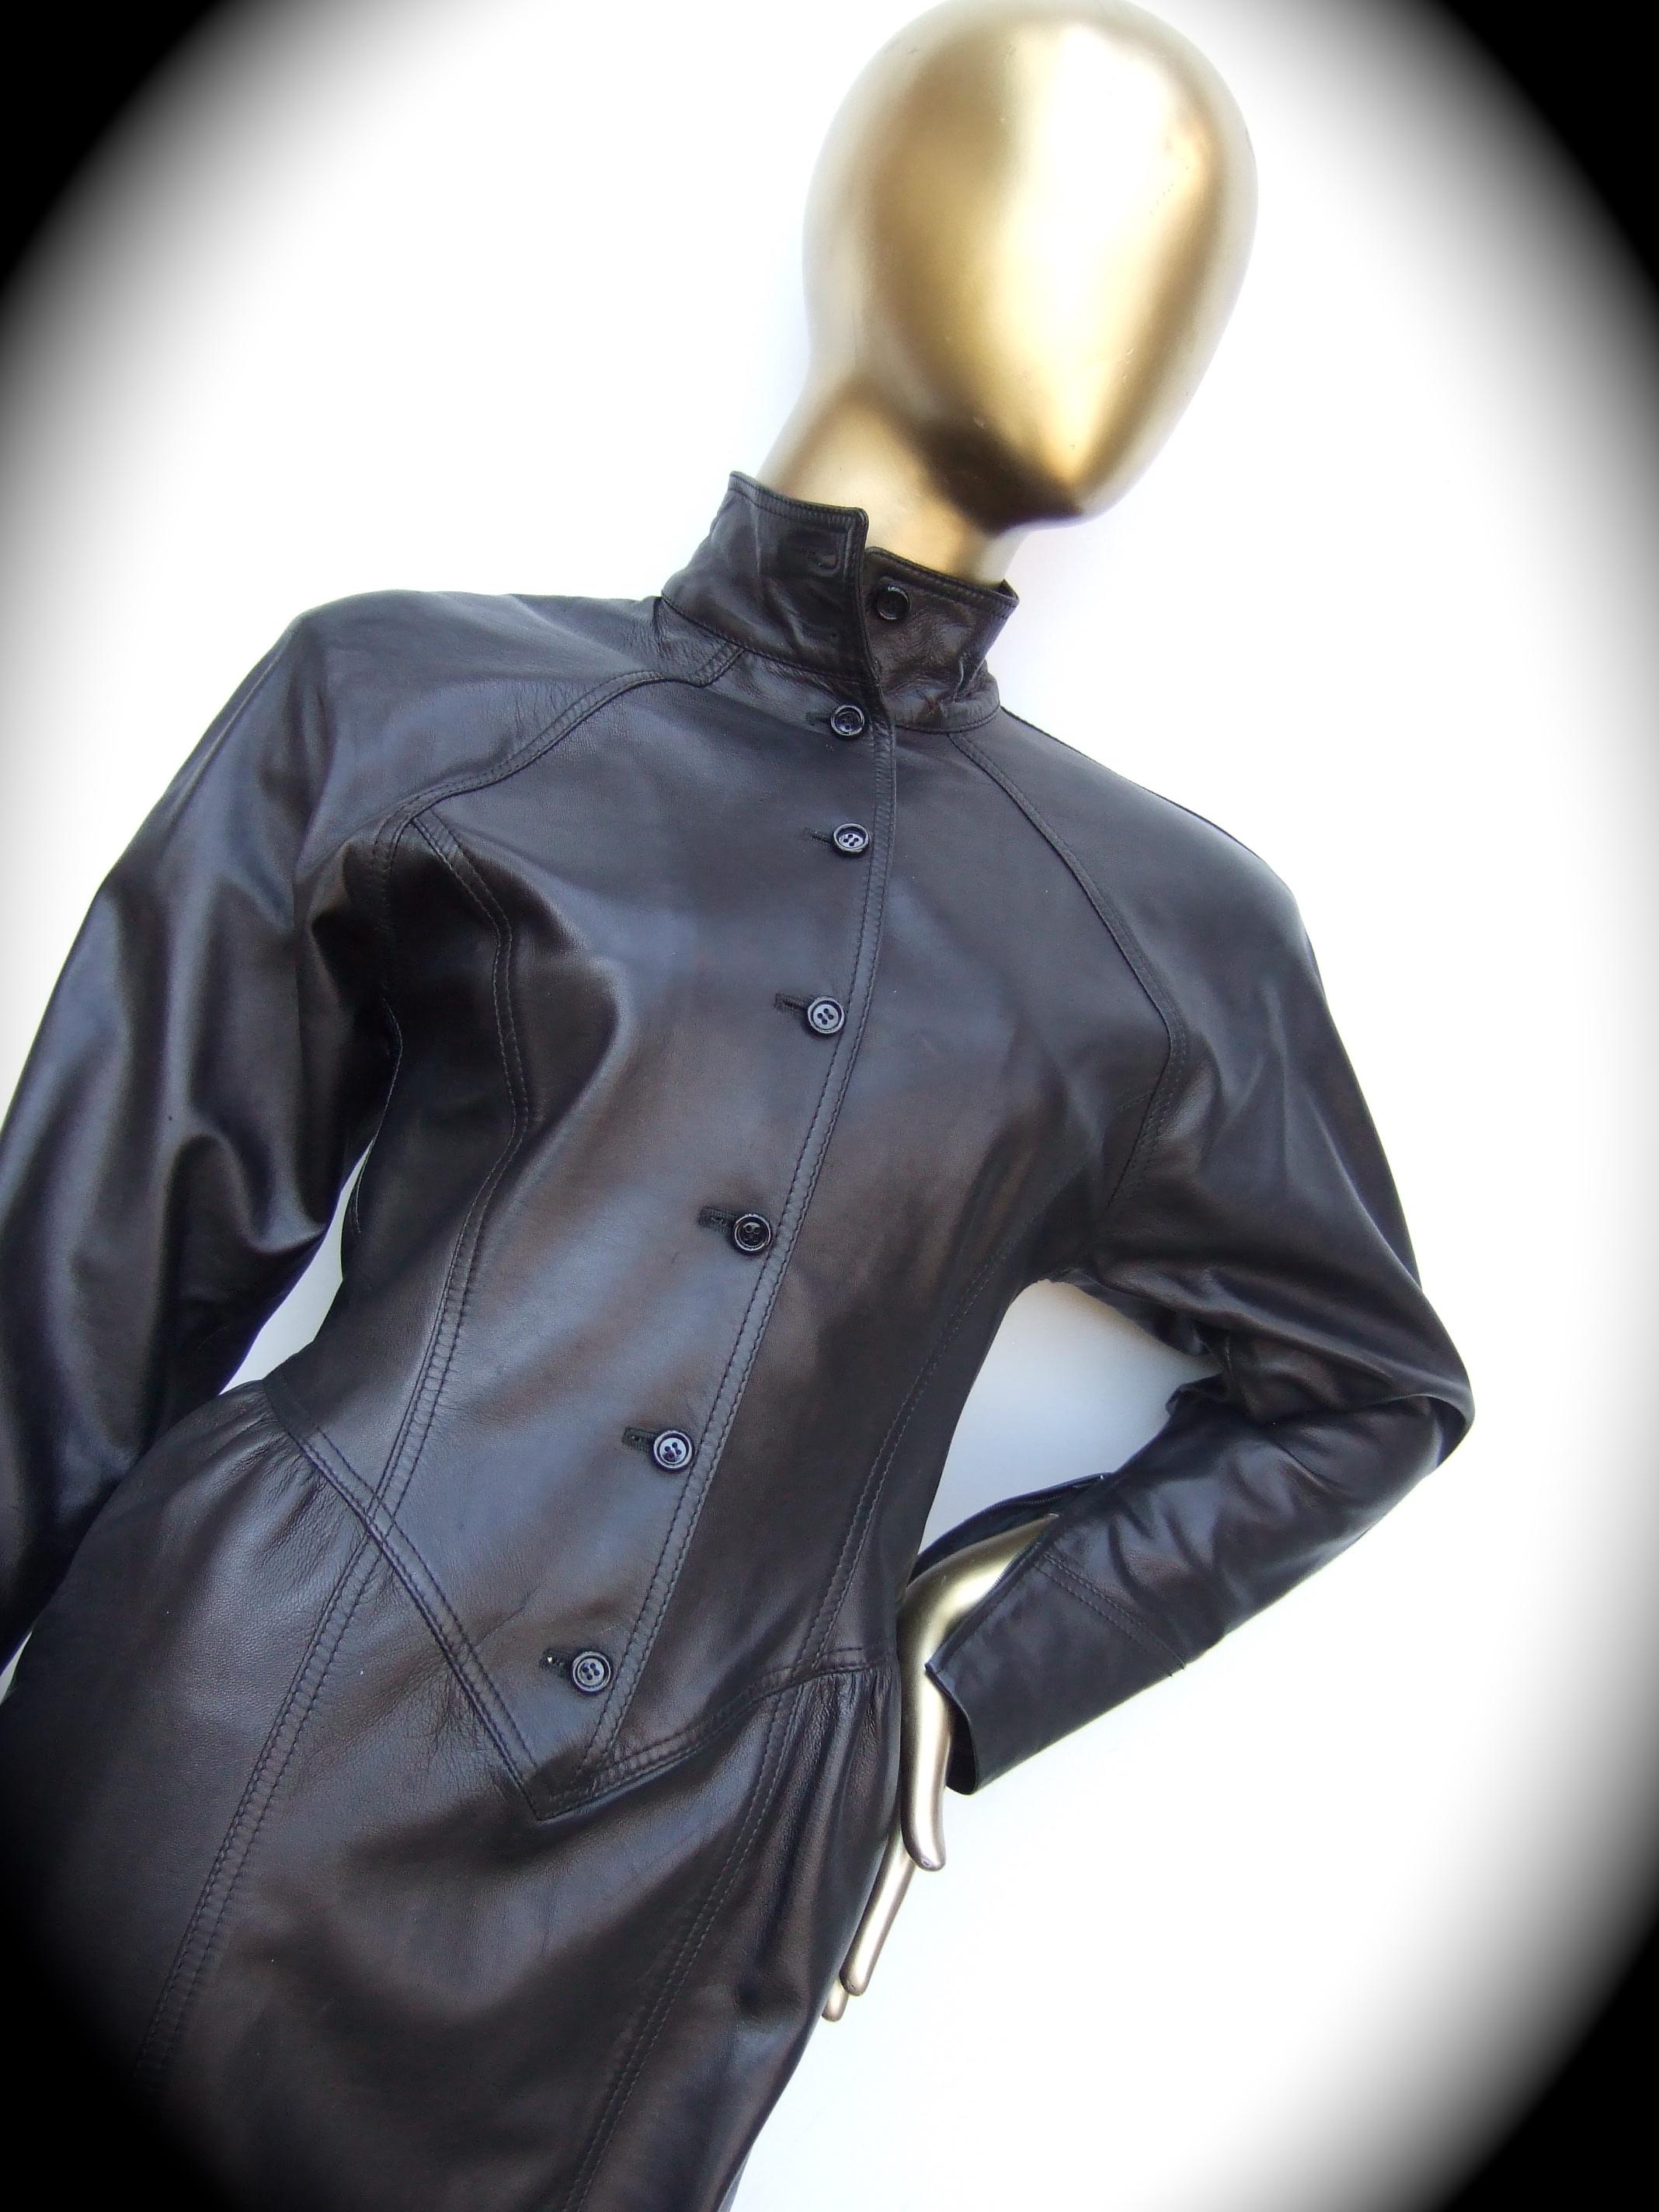 Gray Emanuel Ungaro Paris Avant-garde Edgy Brown Leather Dress Made in Italy c 1980s For Sale